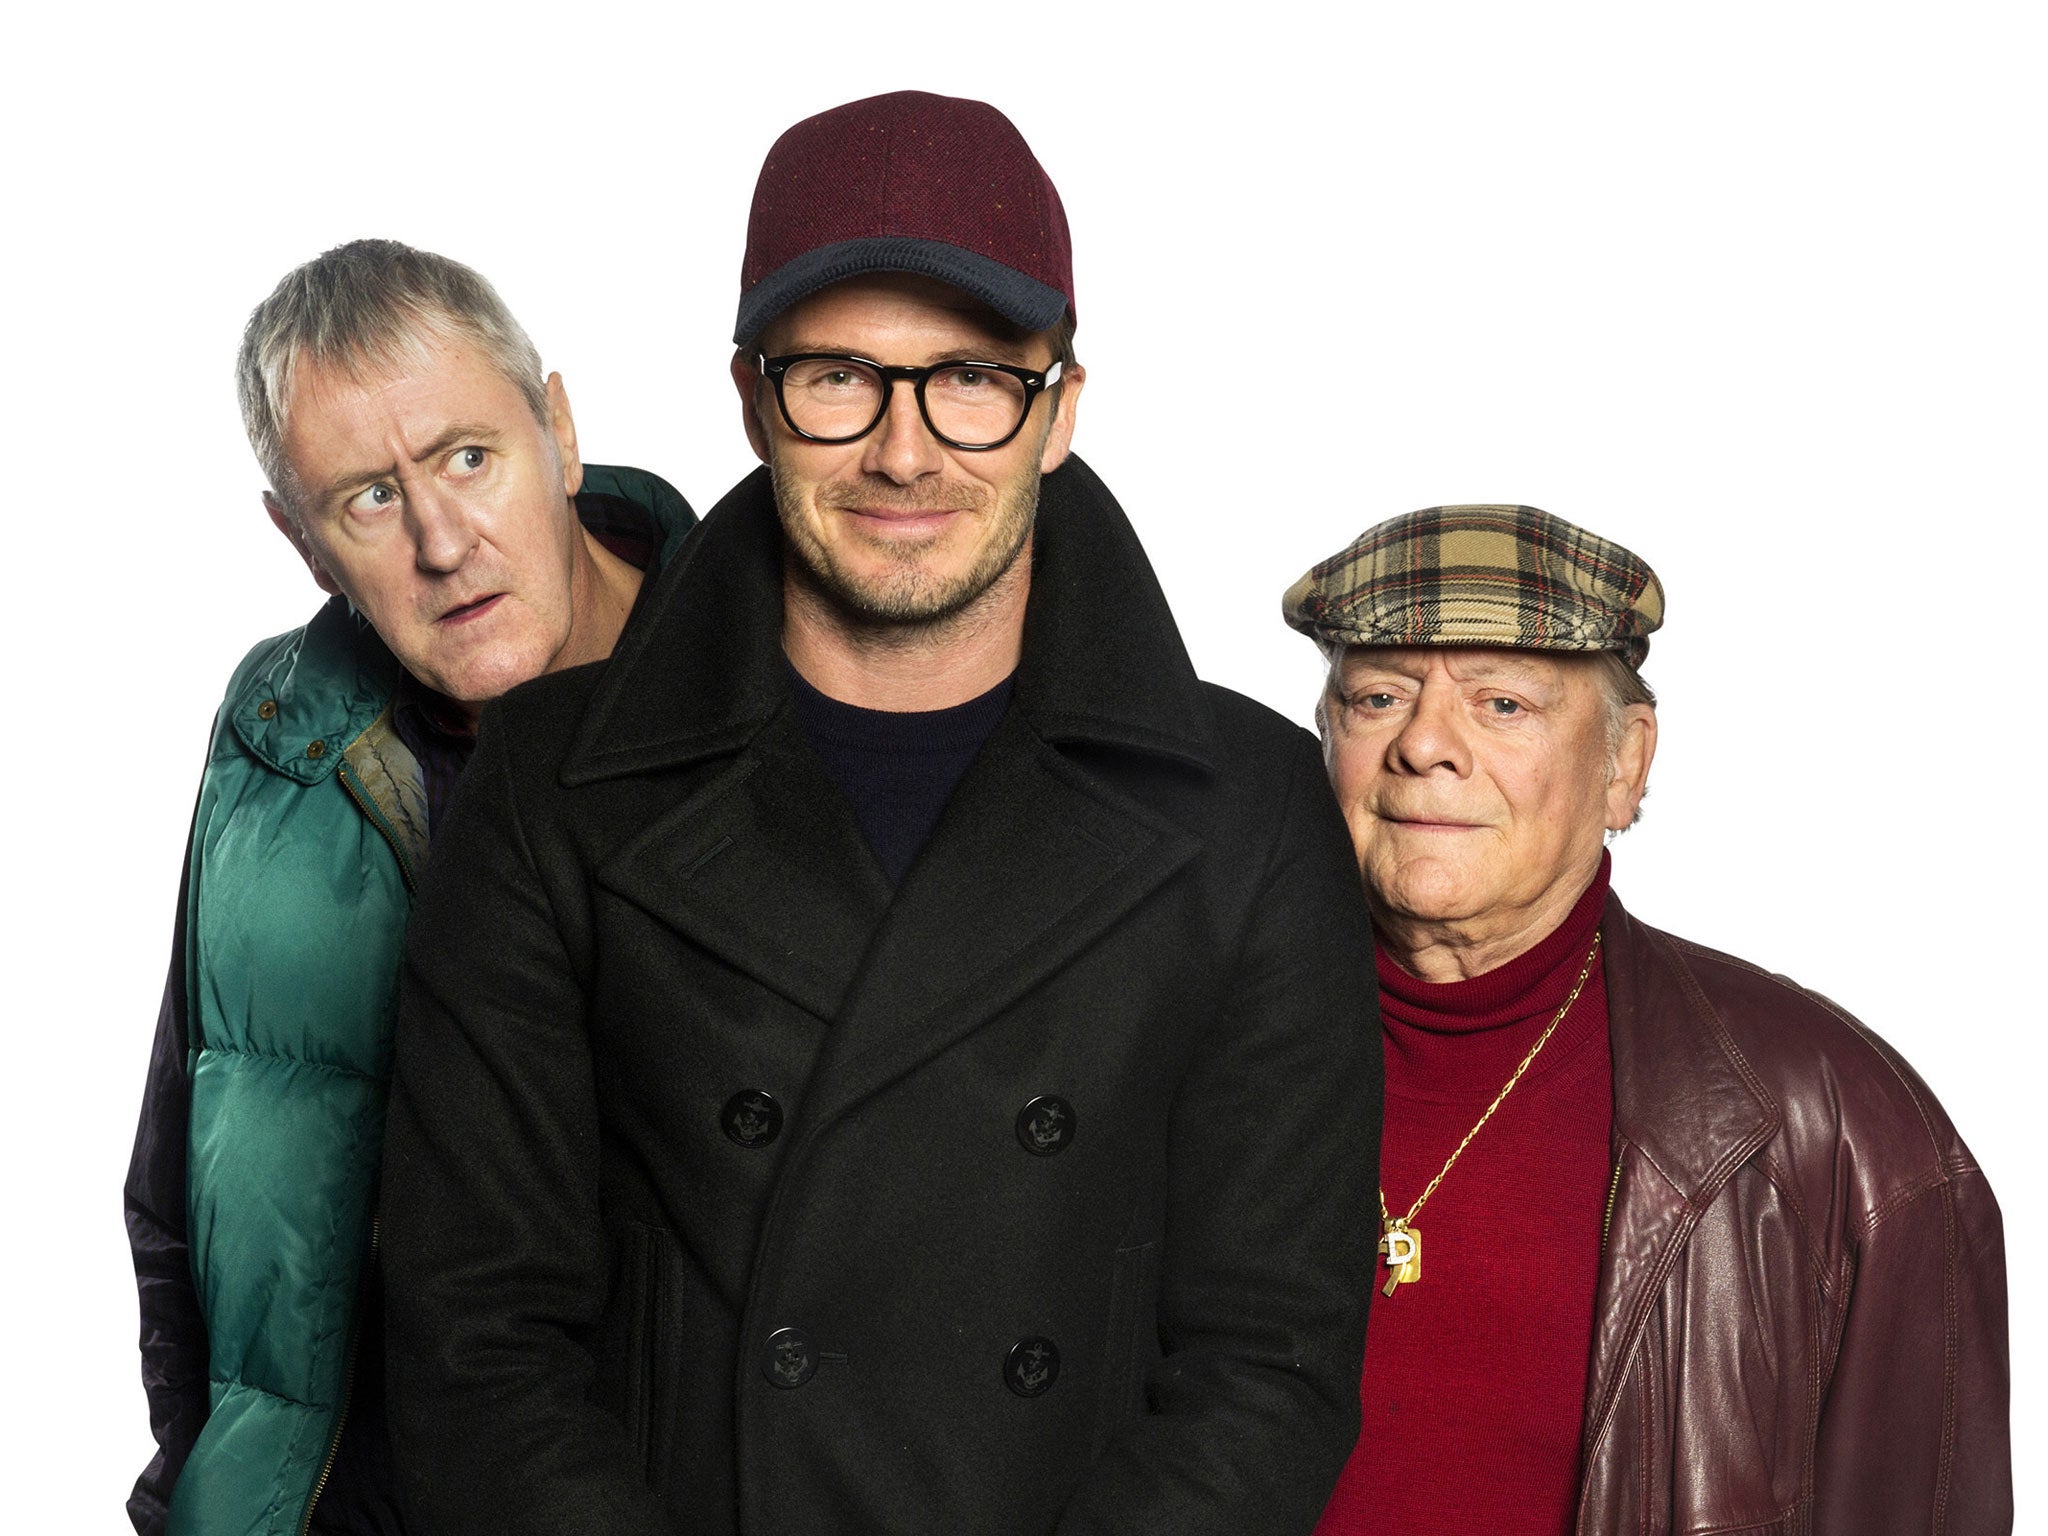 David Beckham with Only Fools and Horses' Del Boy and Rodney